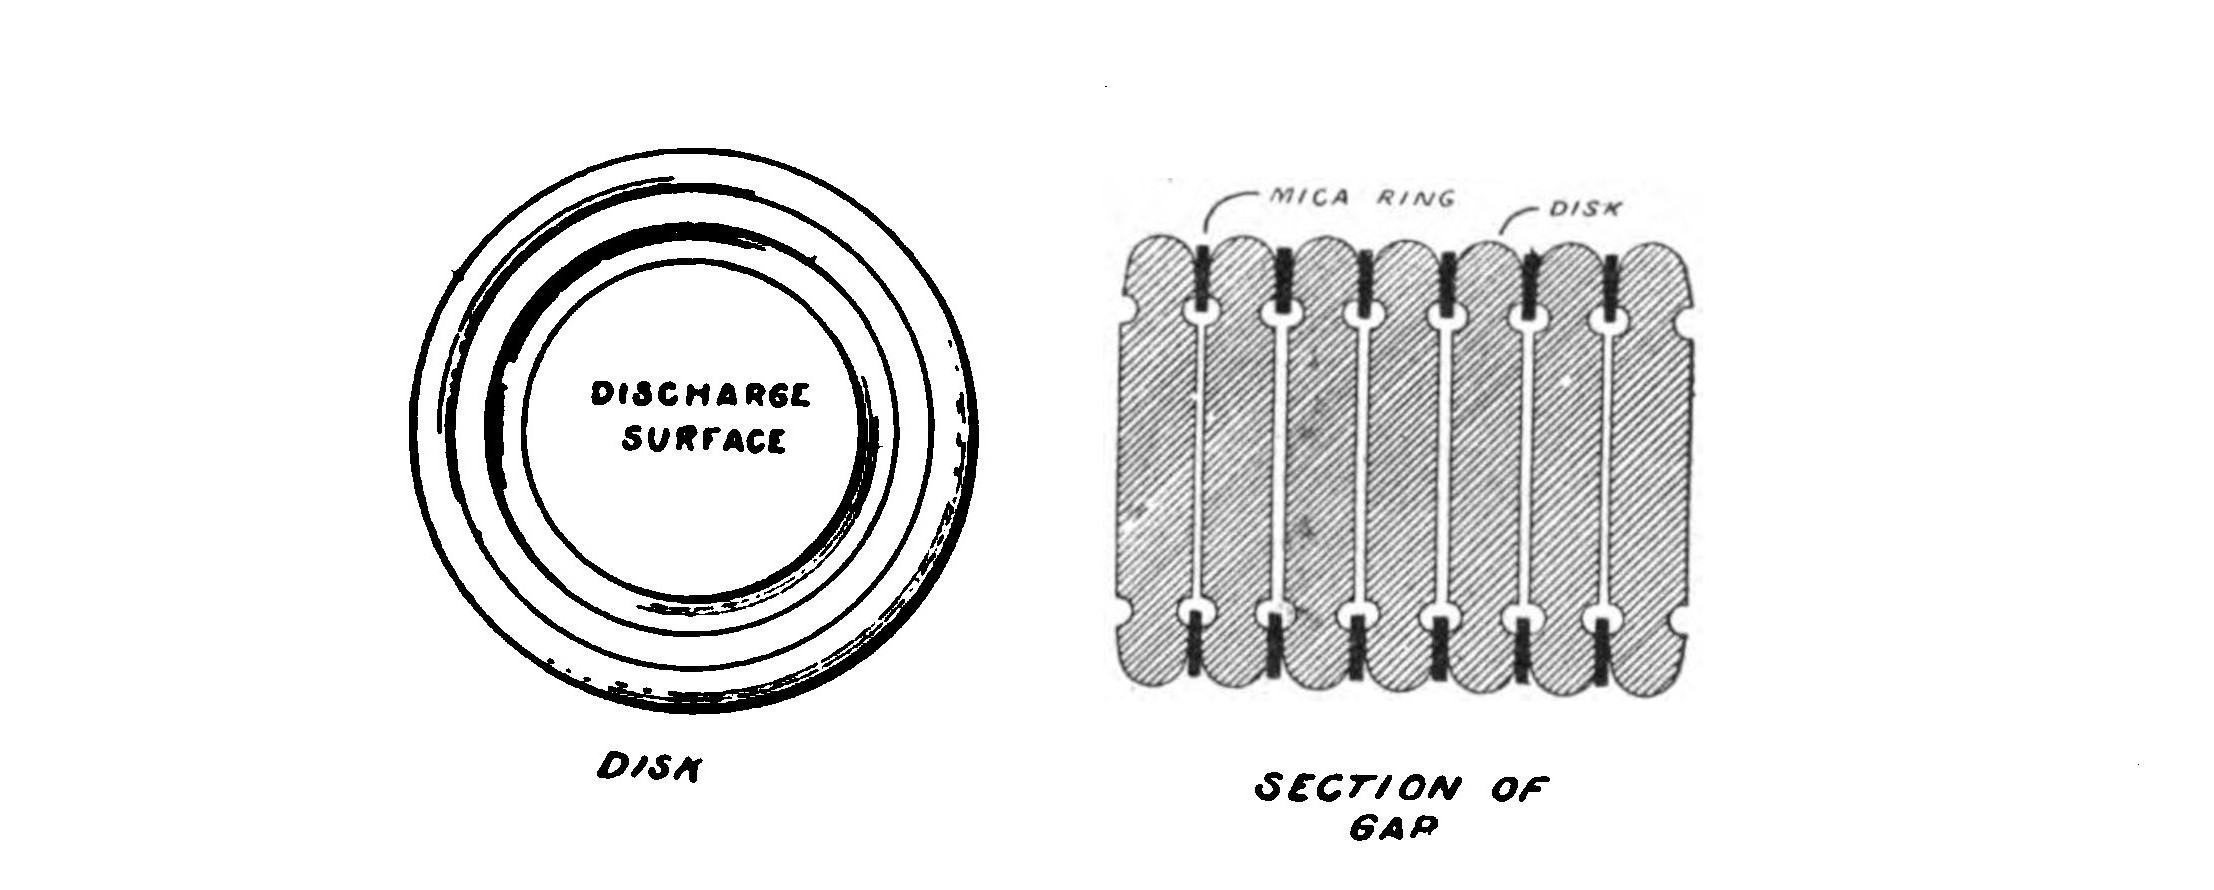 FIG. 53.—Quenched spark gap.